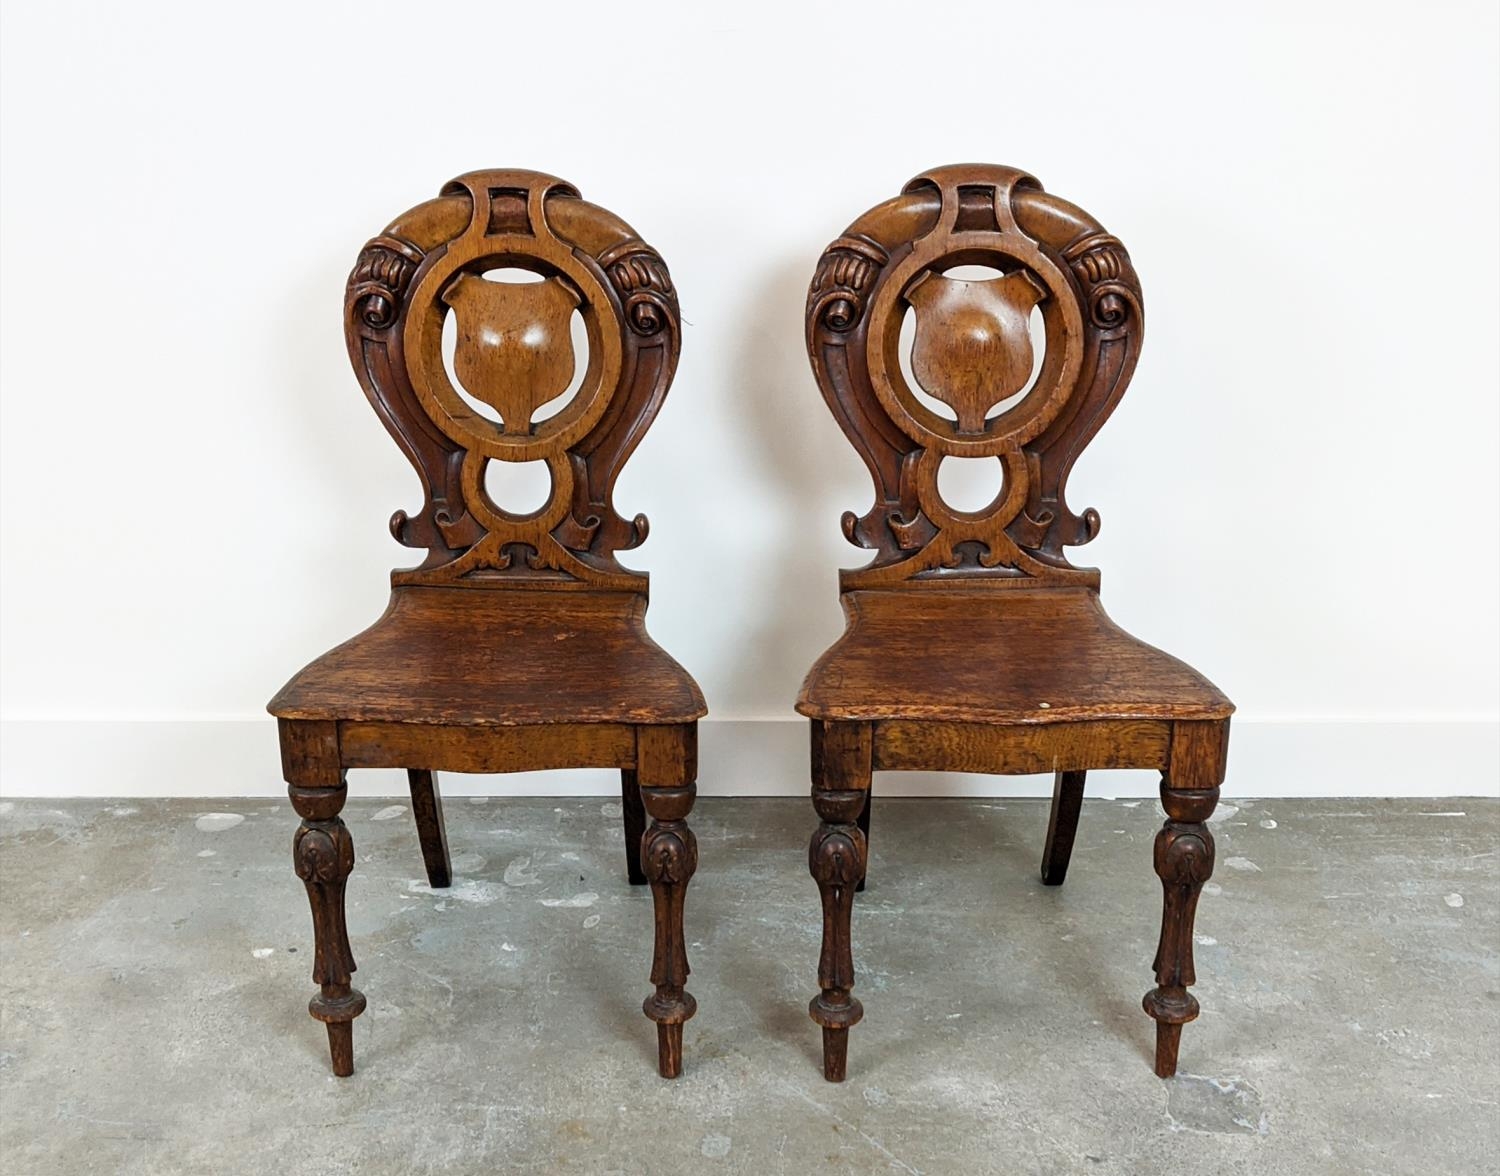 HALL CHAIRS, a pair, Victorian oak, with ornately carved and pierced backs. (2) - Image 11 of 11